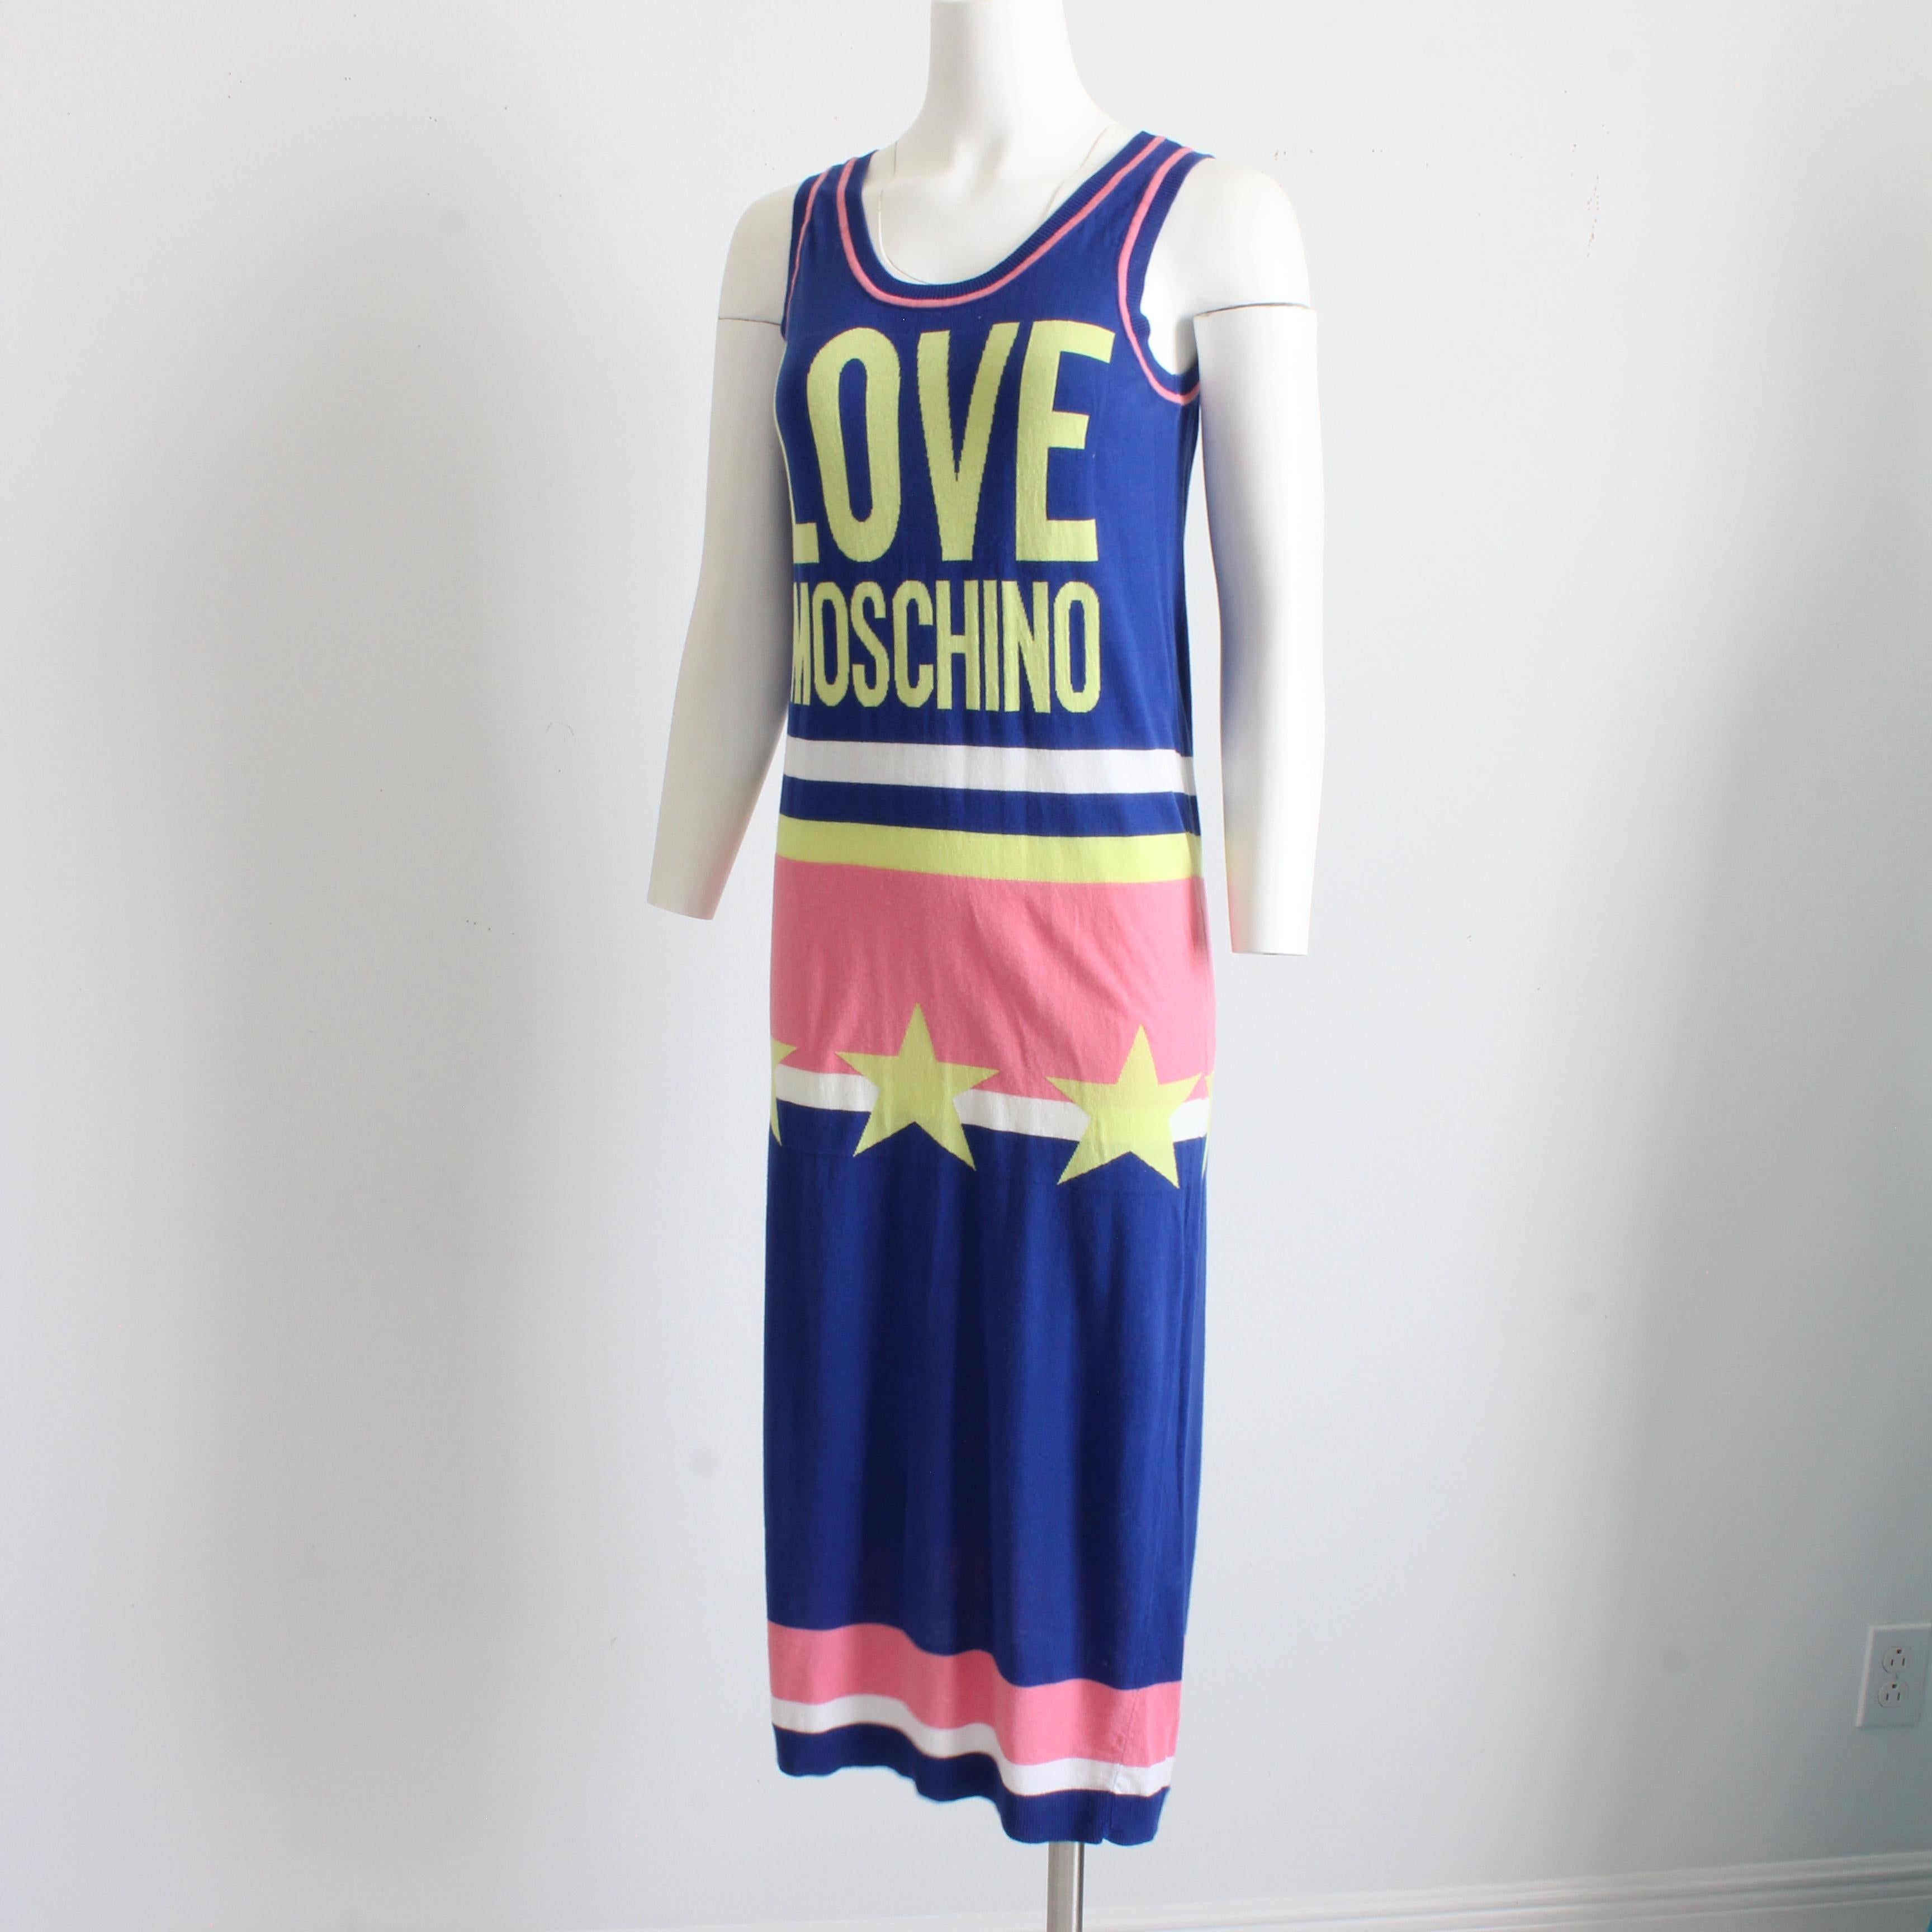 Moschino Maxi Dress Color Block All Stars Pink Blue Cotton Knit Sweater Sz 2 For Sale 3